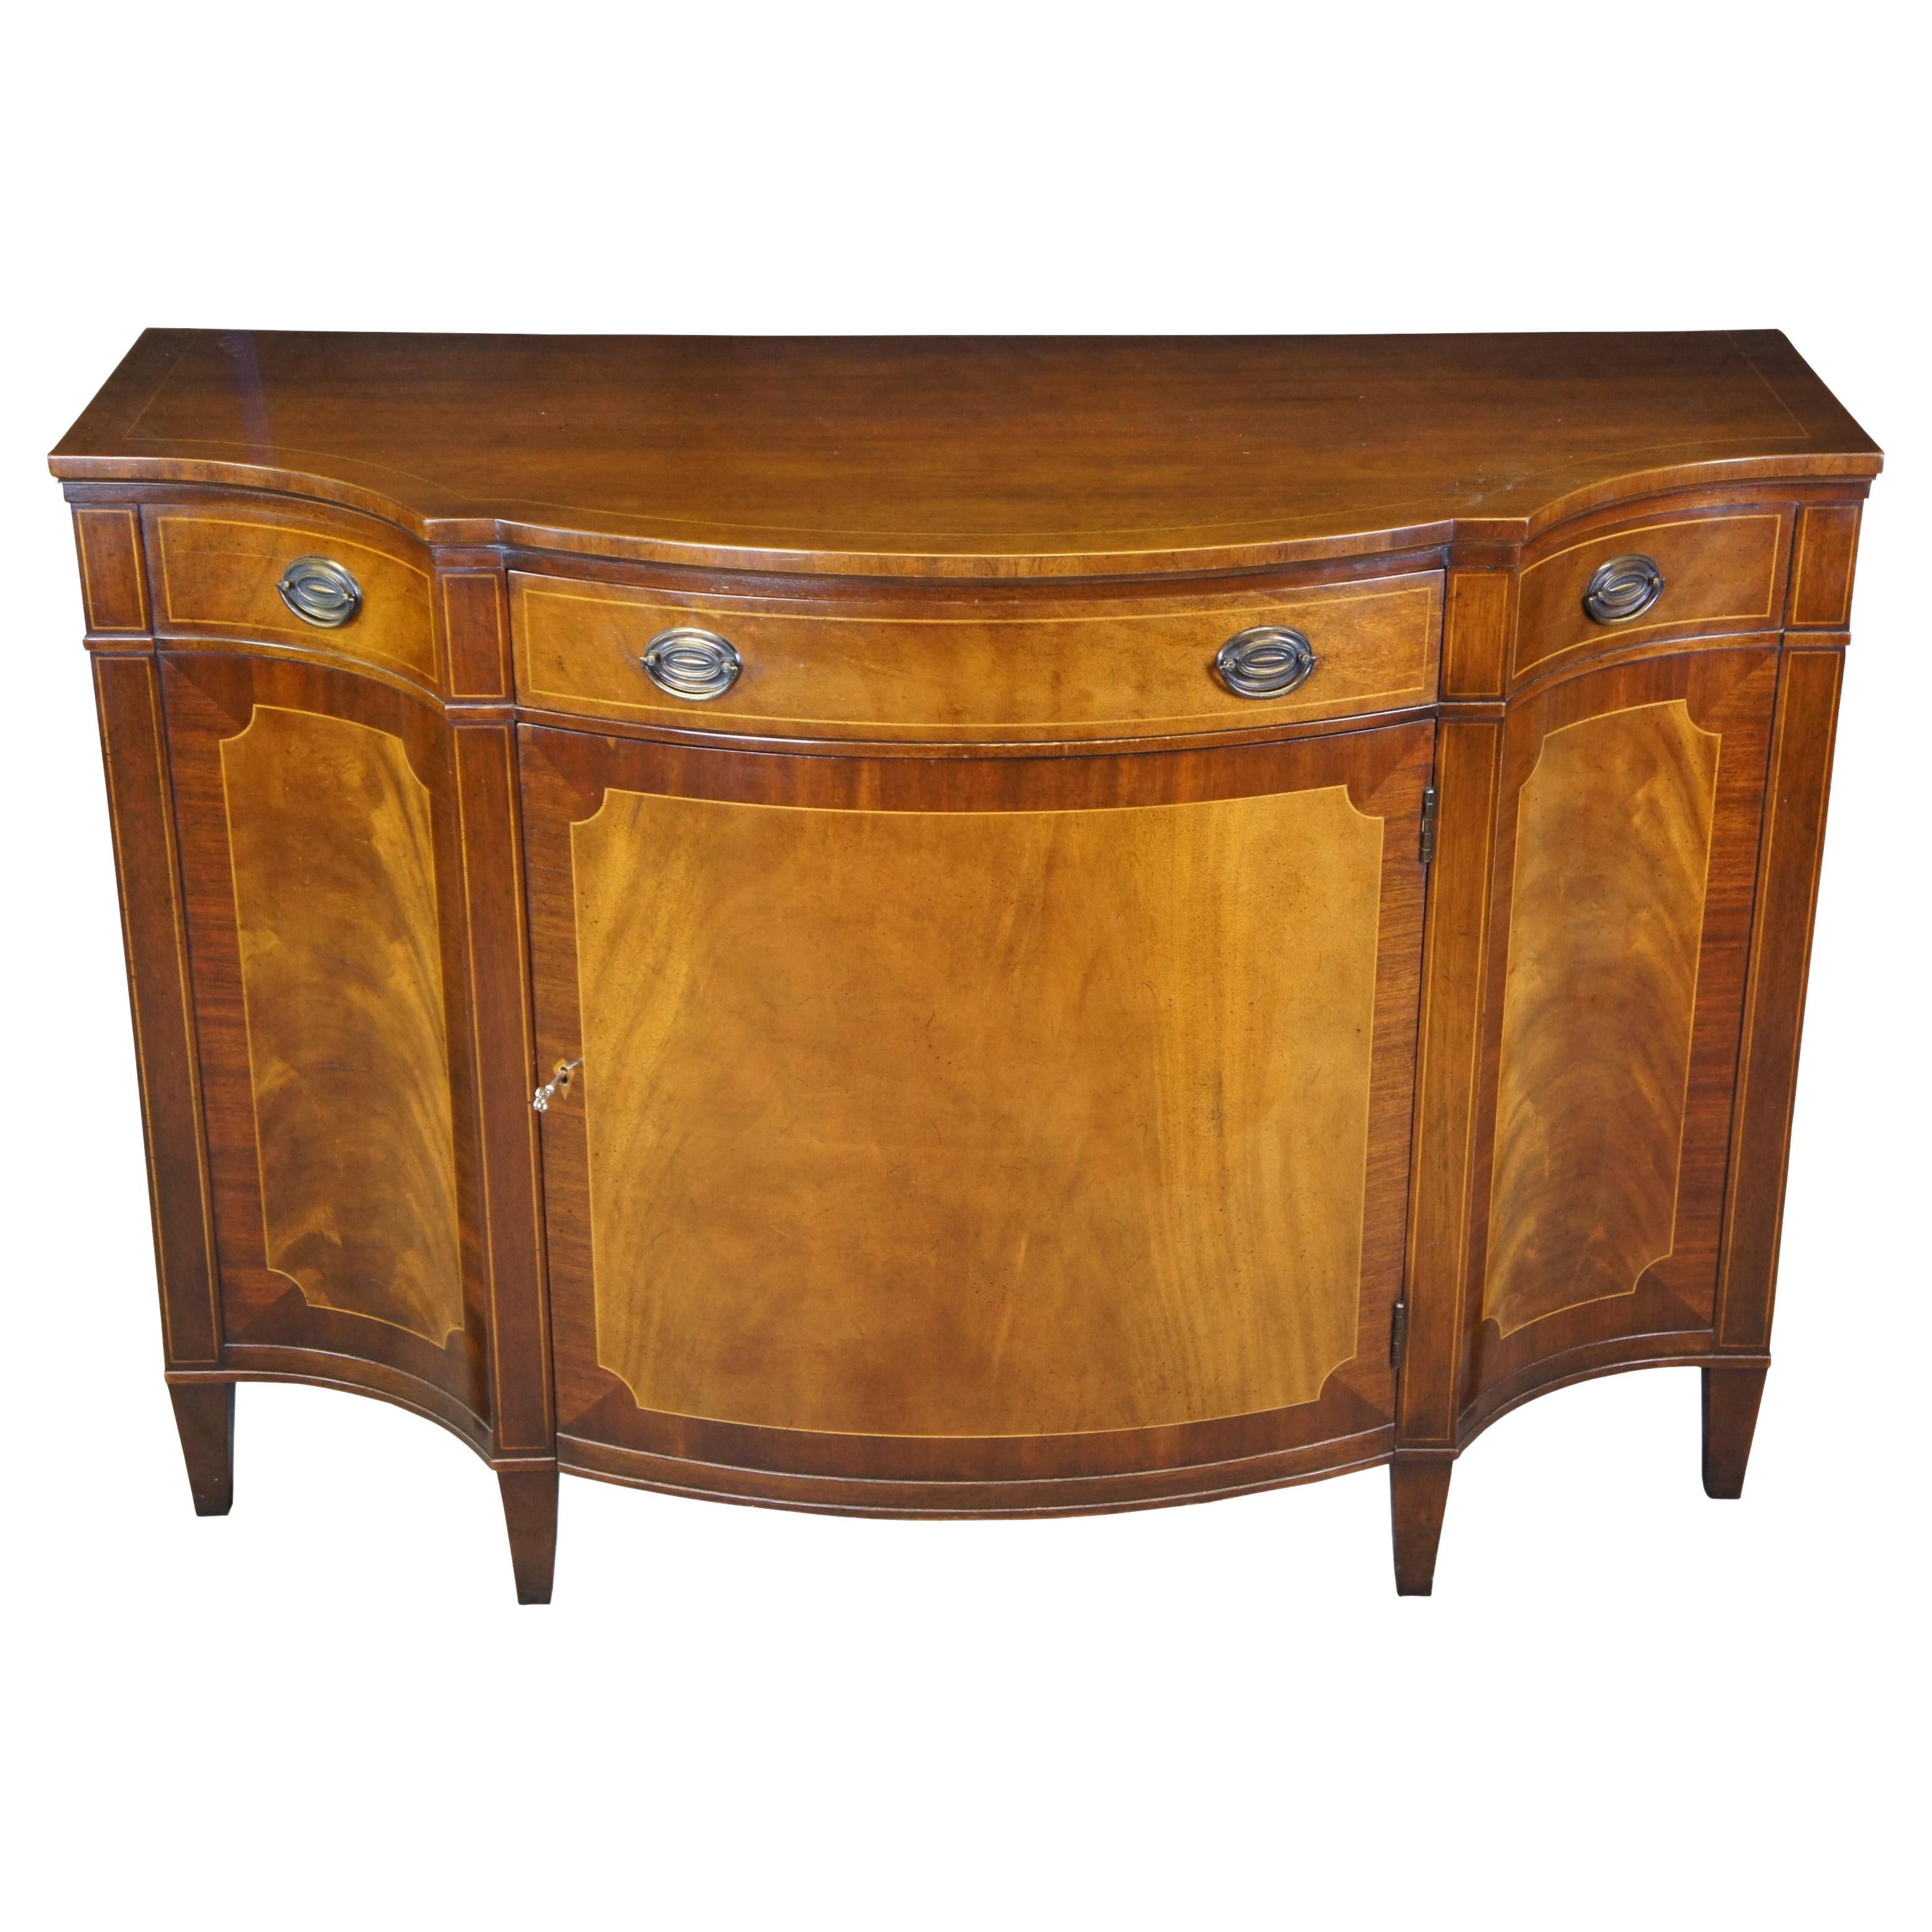 Baker Sheraton Flame Mahogany Demilune Bow Front Console Buffet Cabinet